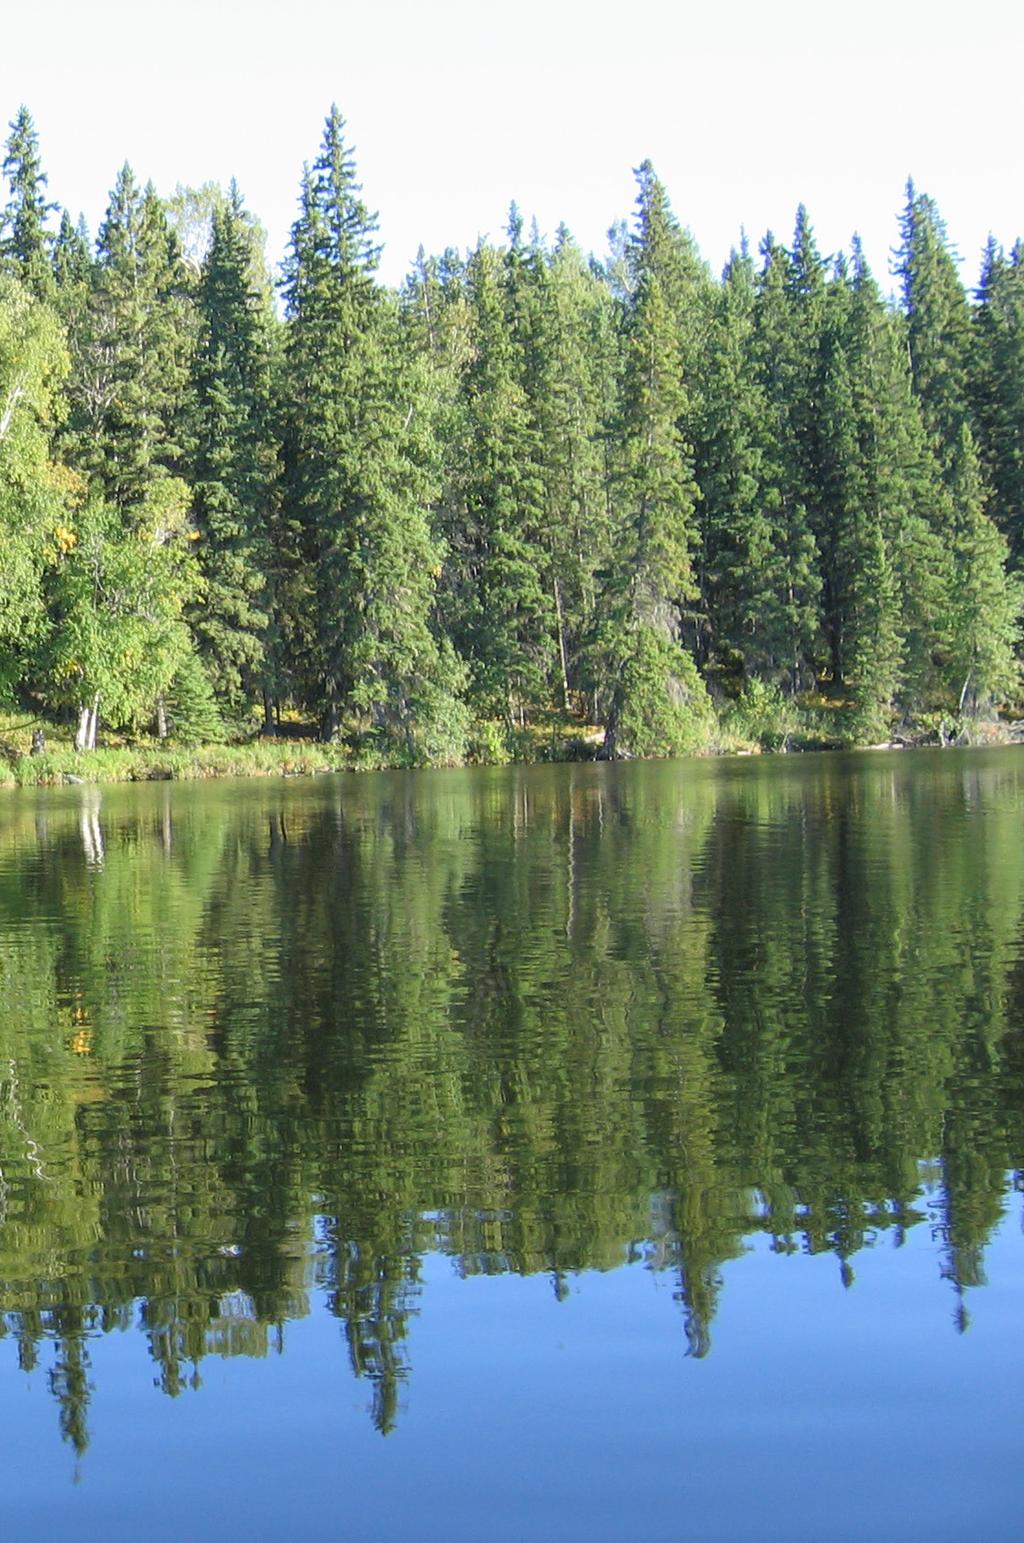 Lakeland Provincial Park Lakeland Backcountry Guide Alberta s provincial parks and recreation areas provide facilities and opportunities for outdoor recreation, protecting ecological processes within